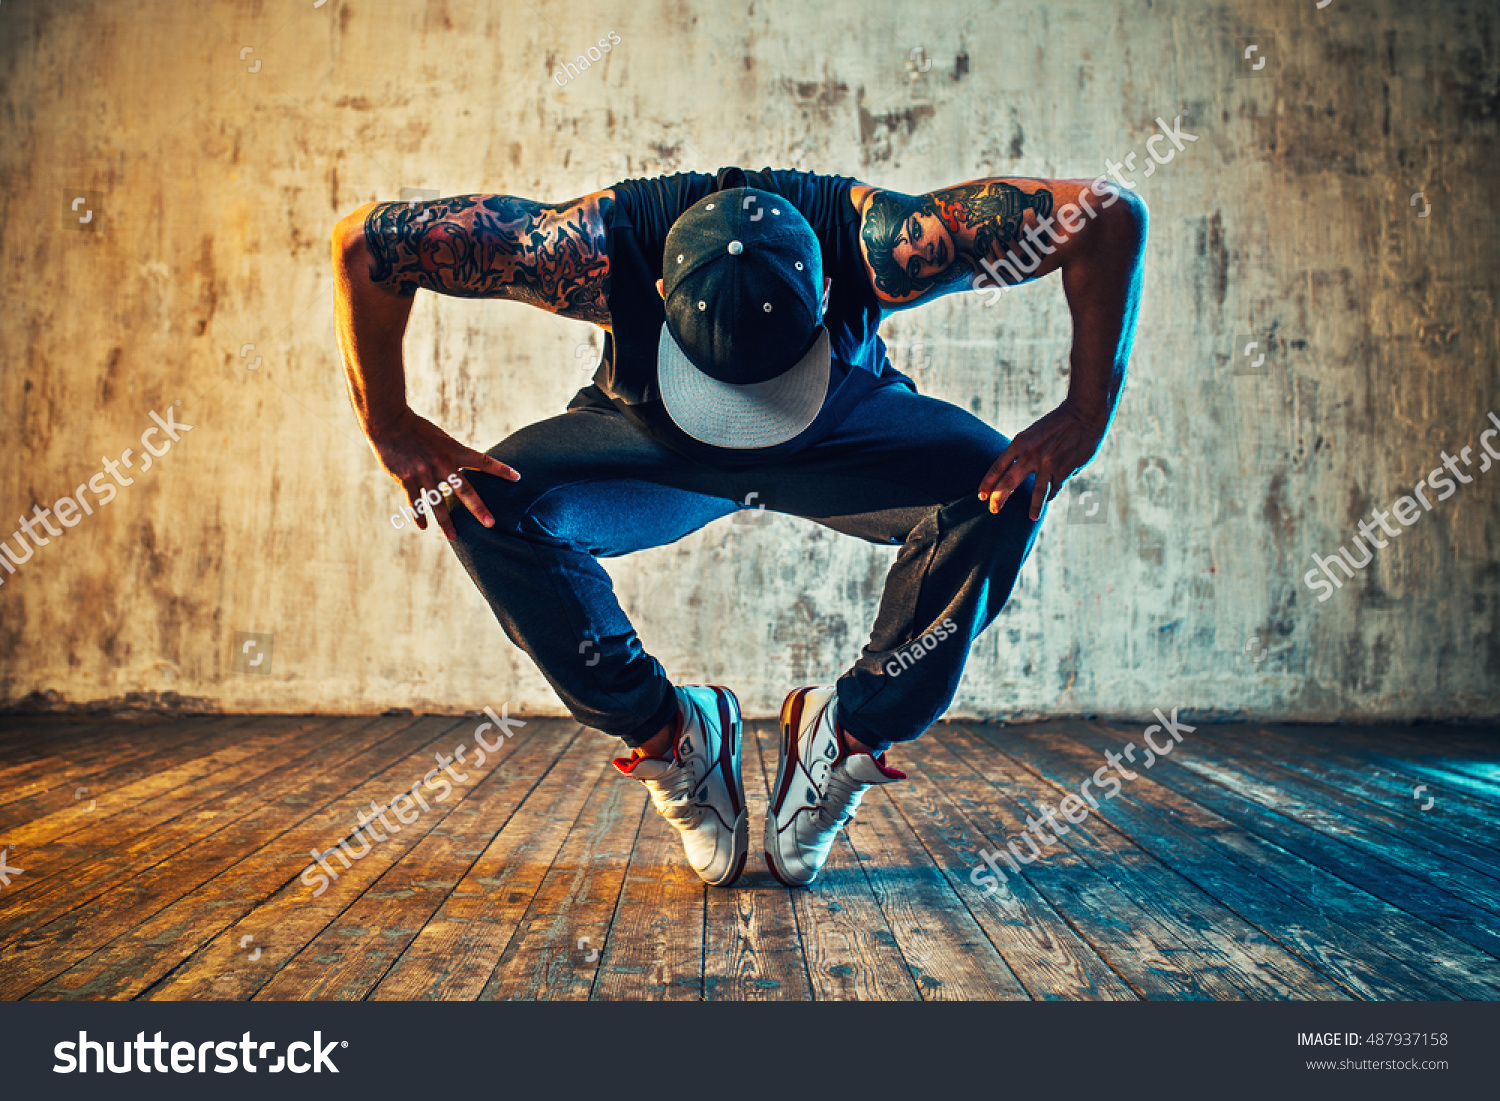 Young man break dancing on wall background. Blue and yellow colors tint. Tattoo on body. #487937158